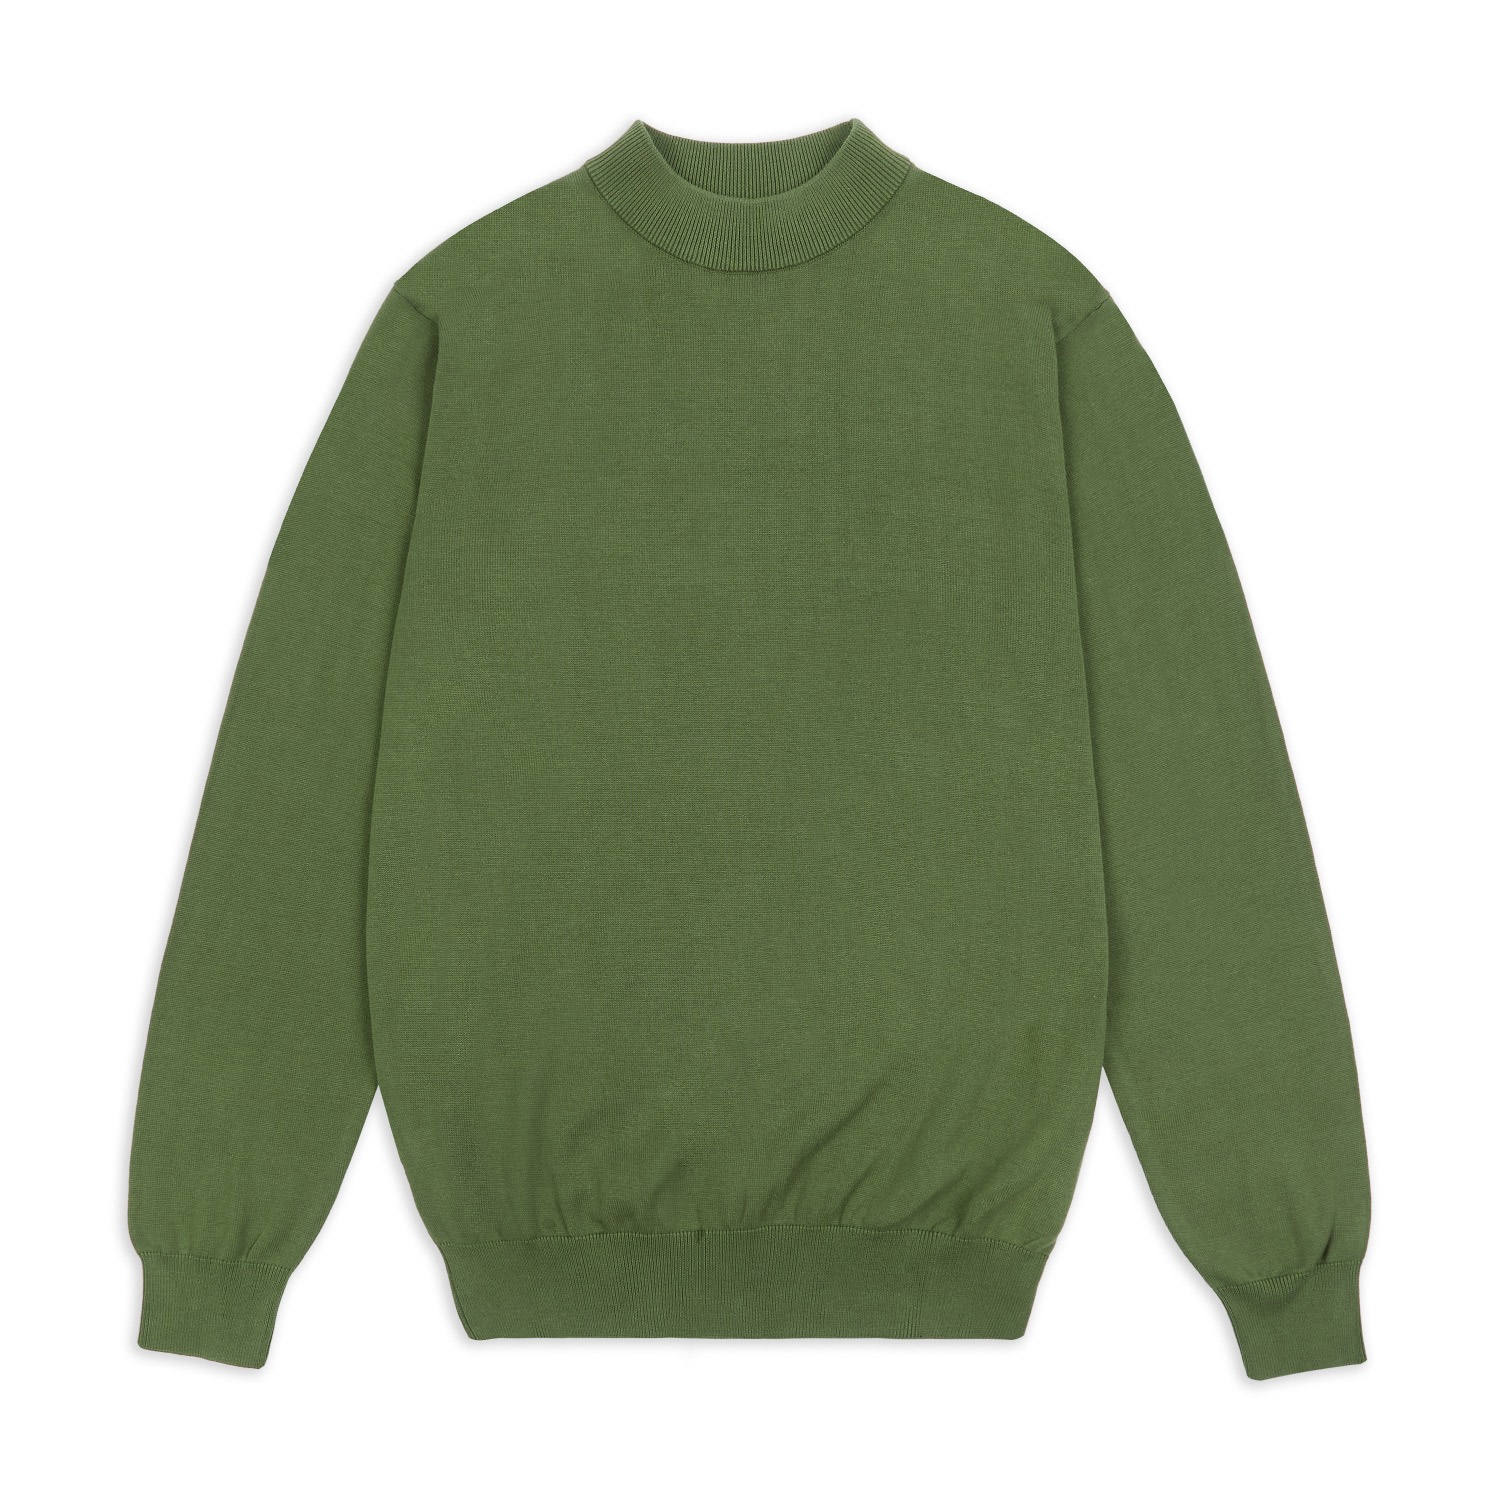 Burrows And Hare Men's Mock Turtle Neck - Light Green